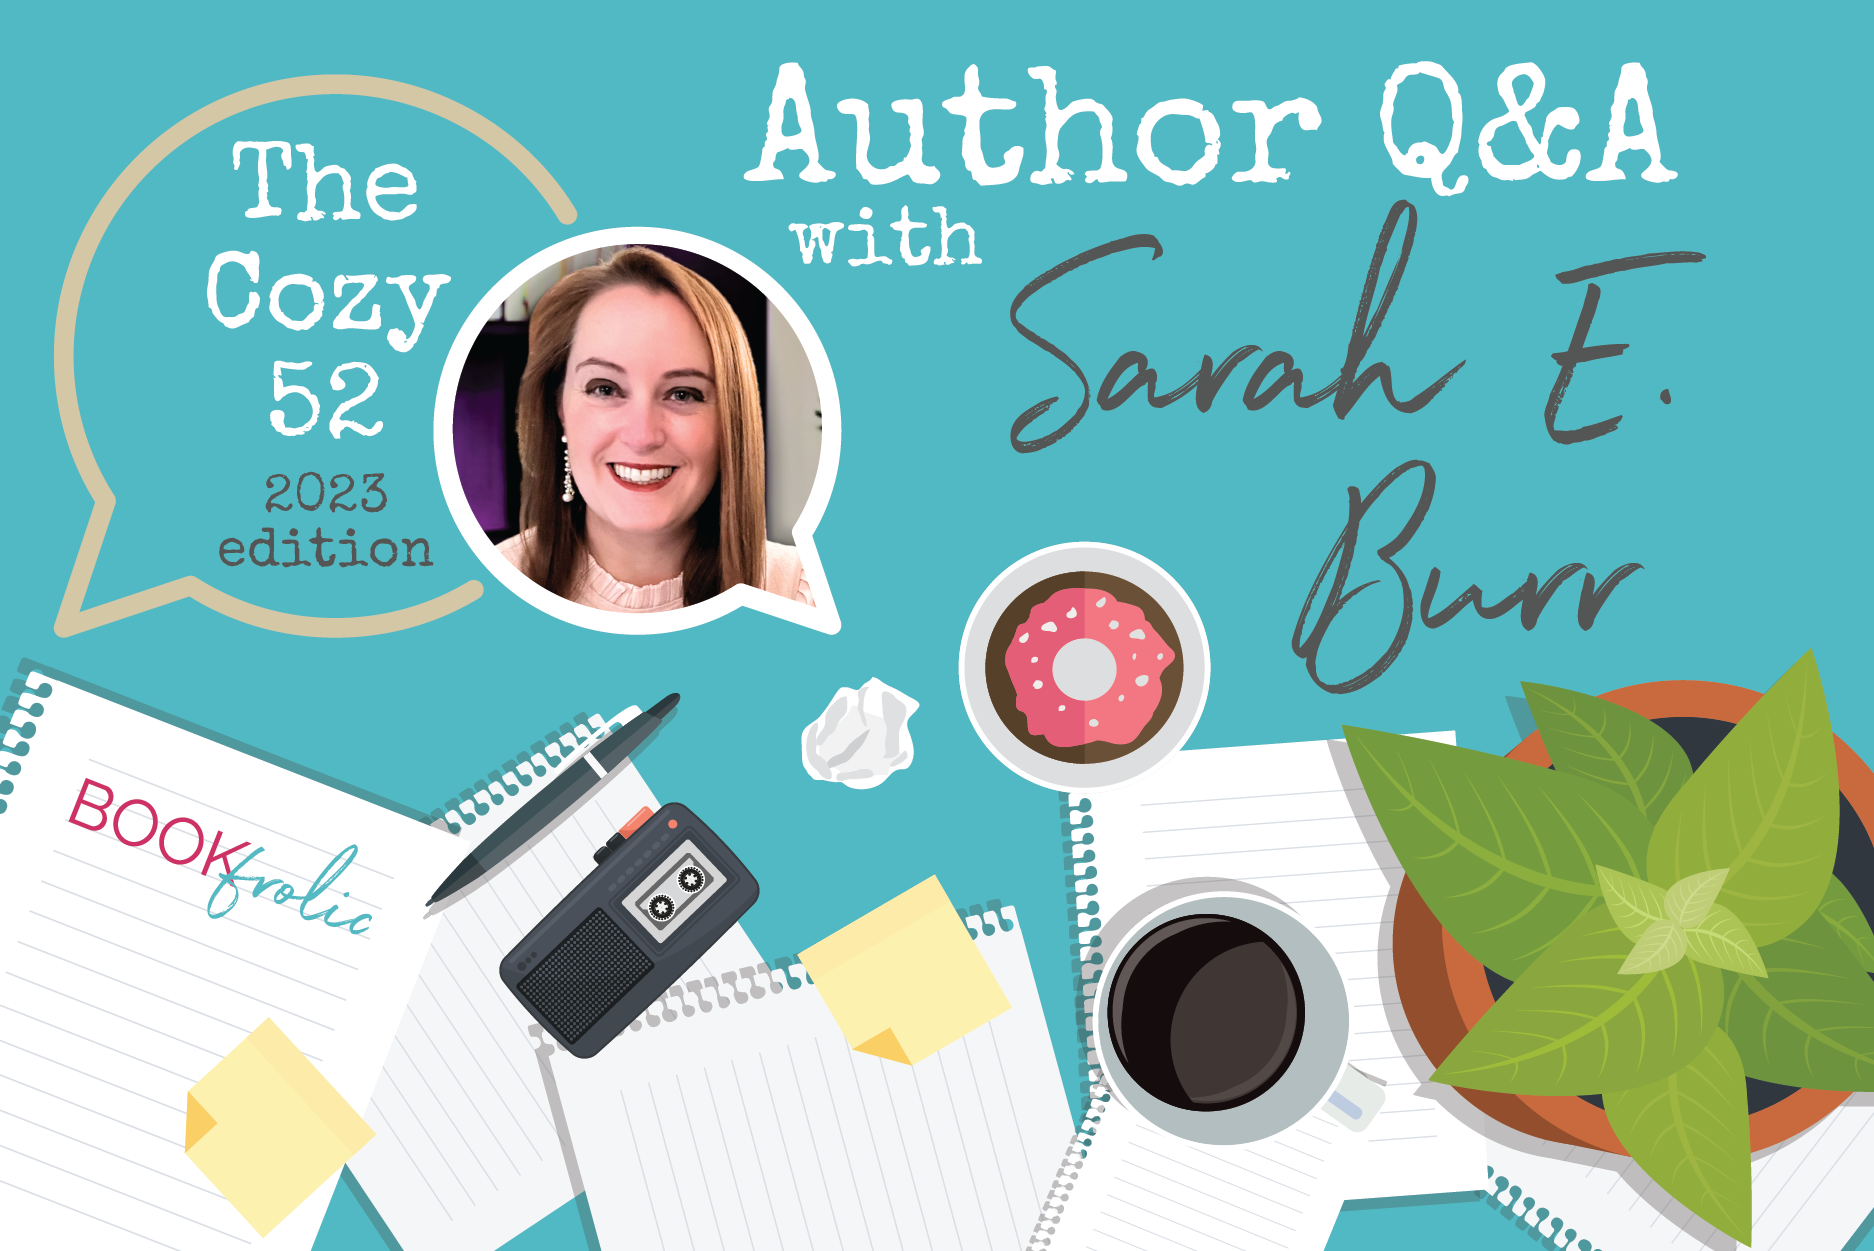 blog banner for interview with Sarah E. Burr